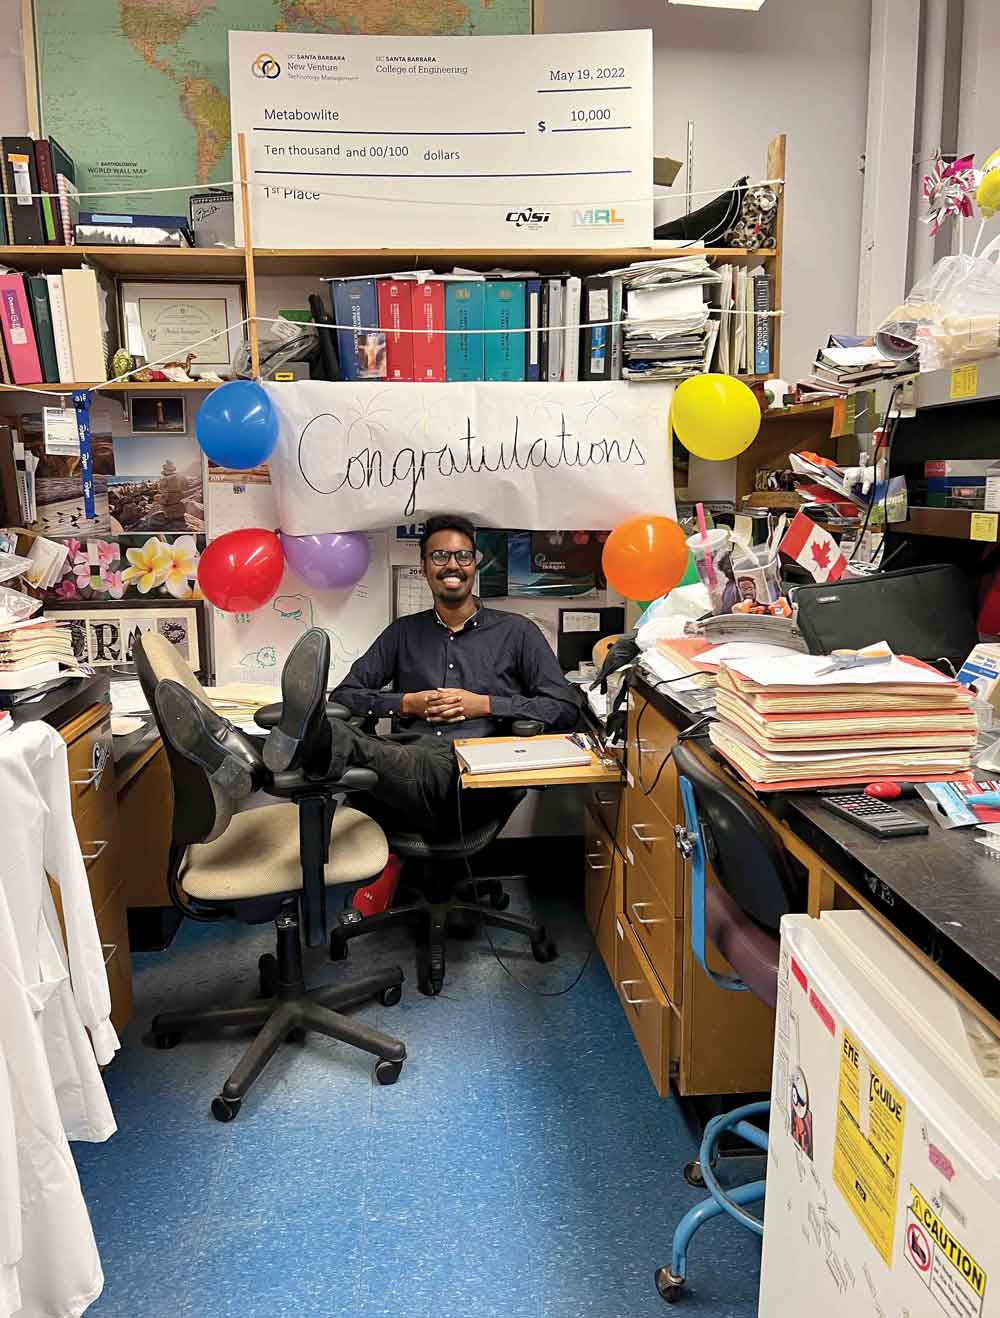 Mohamed Faynus in his office after coworkers decorated it to congratulate him on his Ph.D.